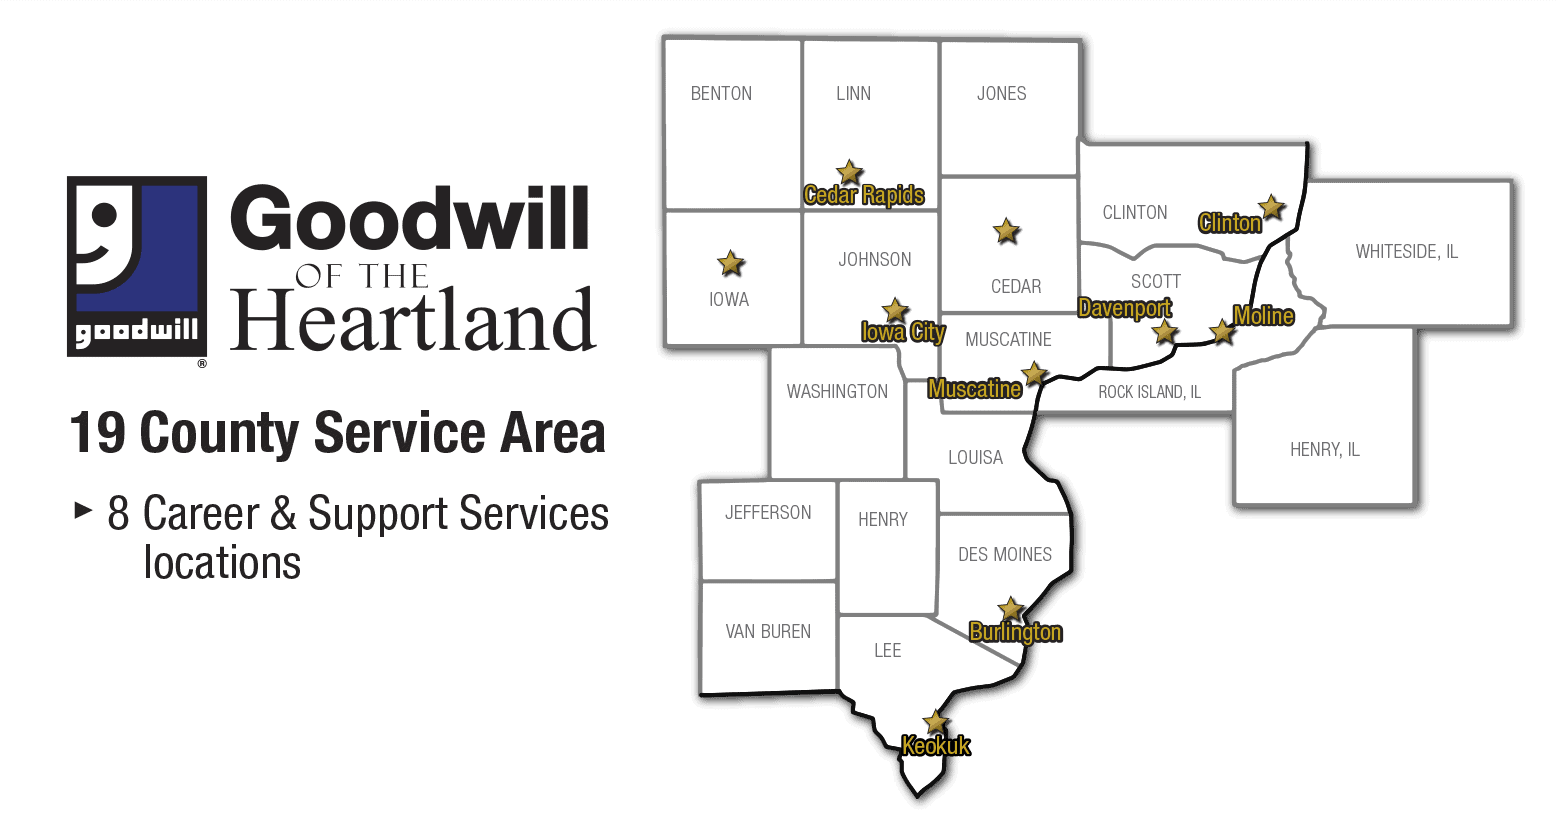 Goodwill of the Heartland 19-county service area map, showing locations to meet workforce needs